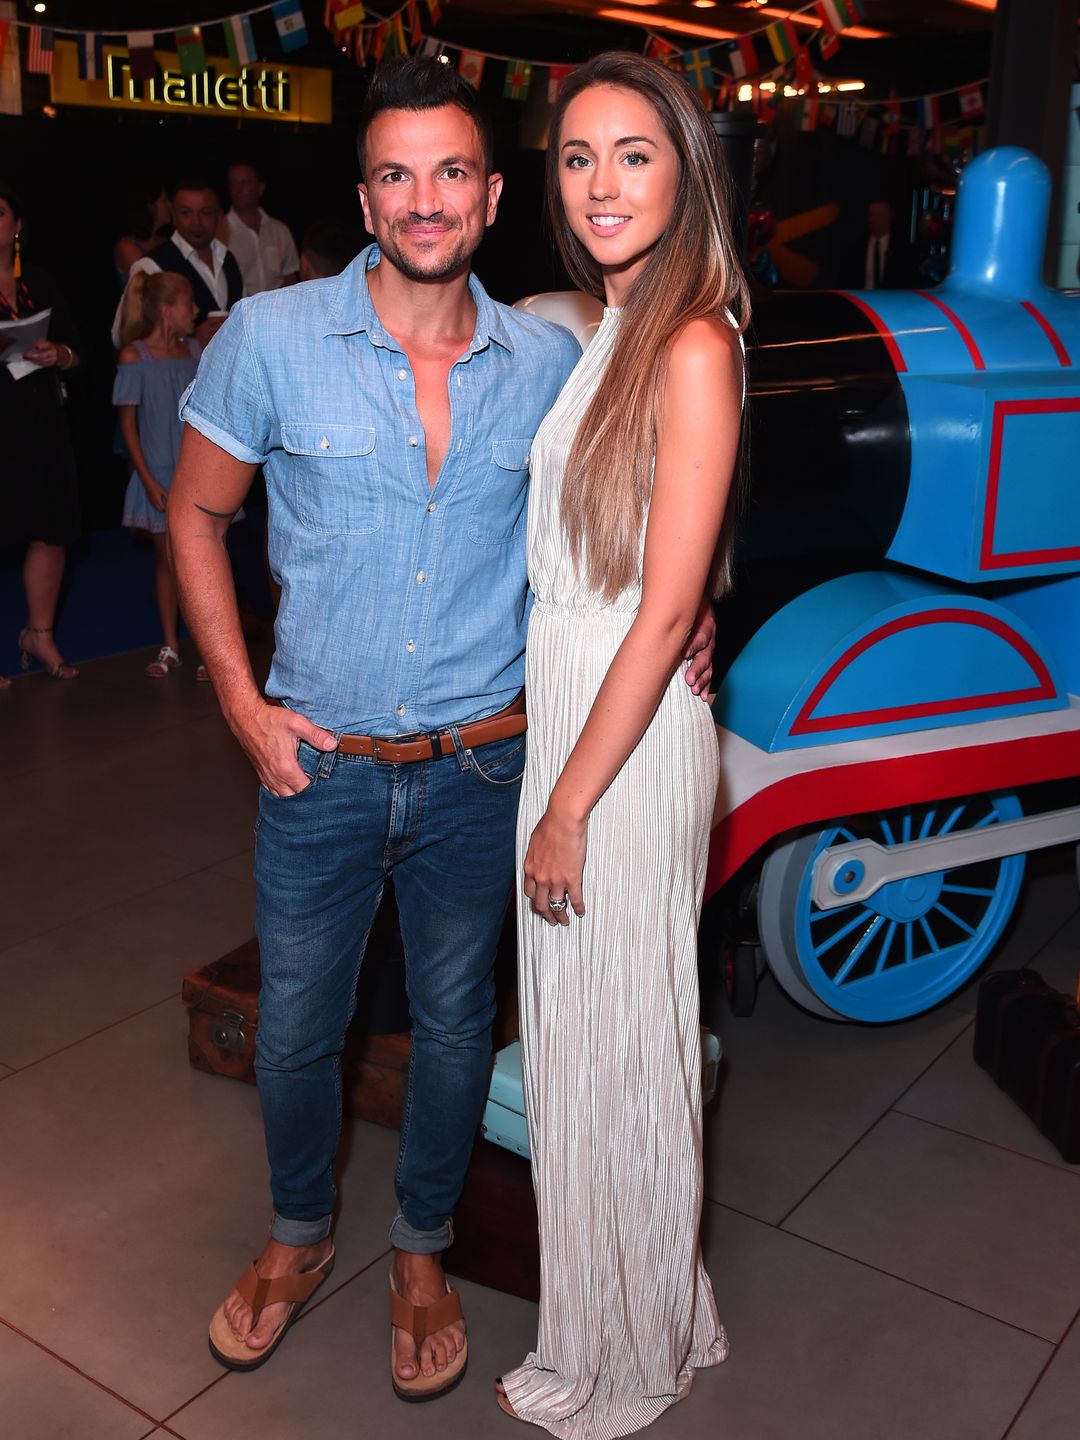 peter and emily andre thomas the tank engine premiere 2018